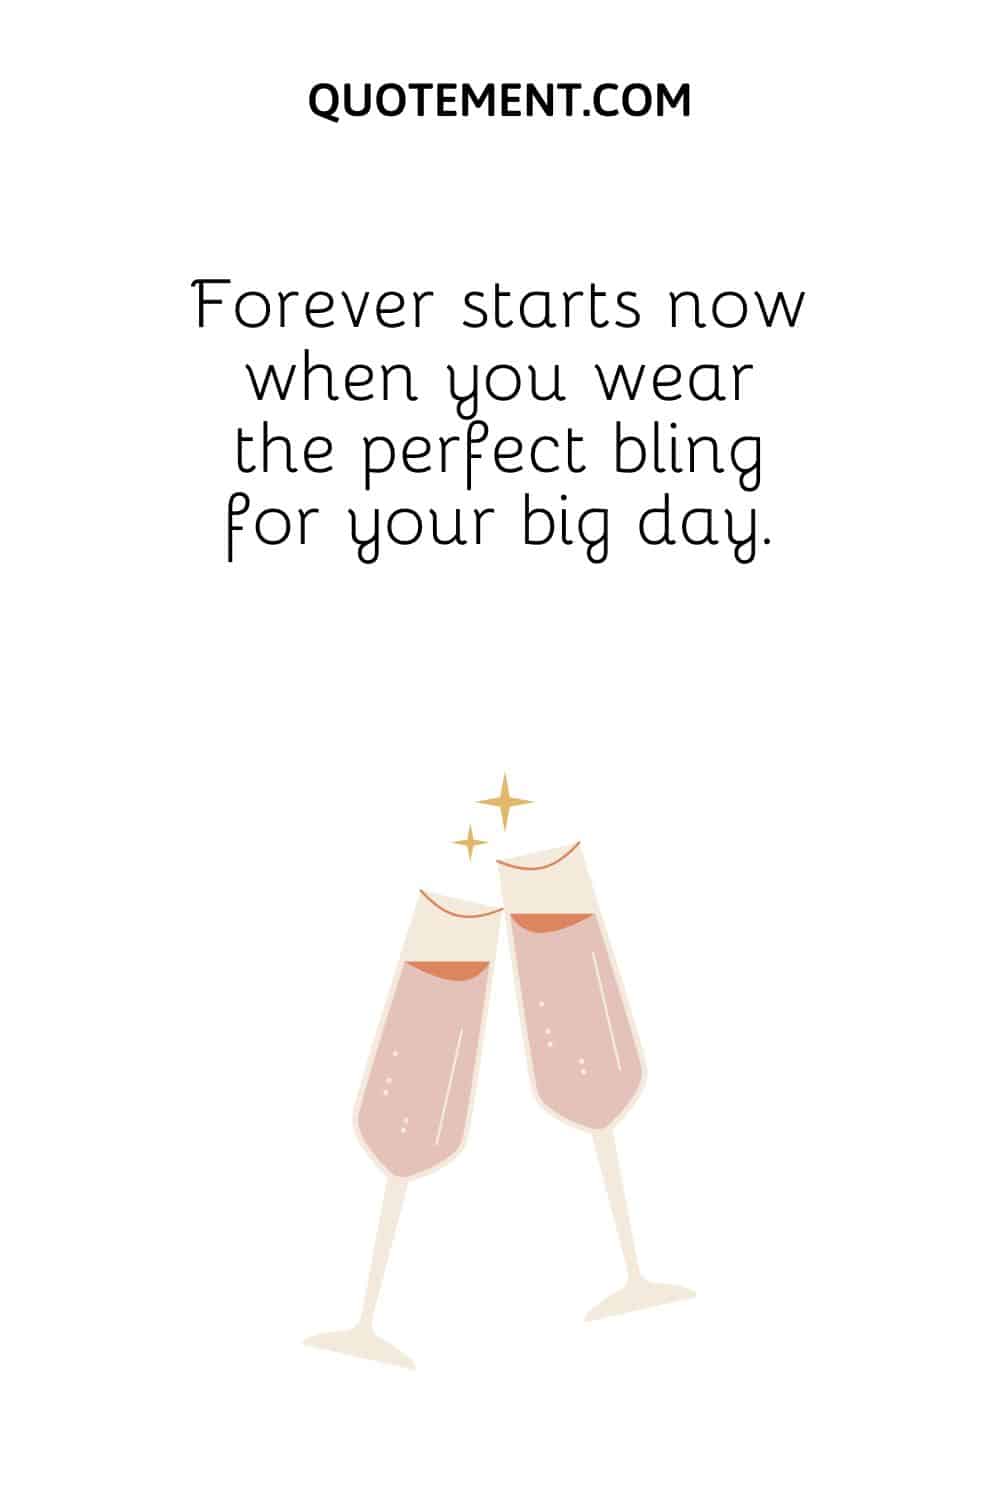 Forever starts now when you wear the perfect bling for your big day.